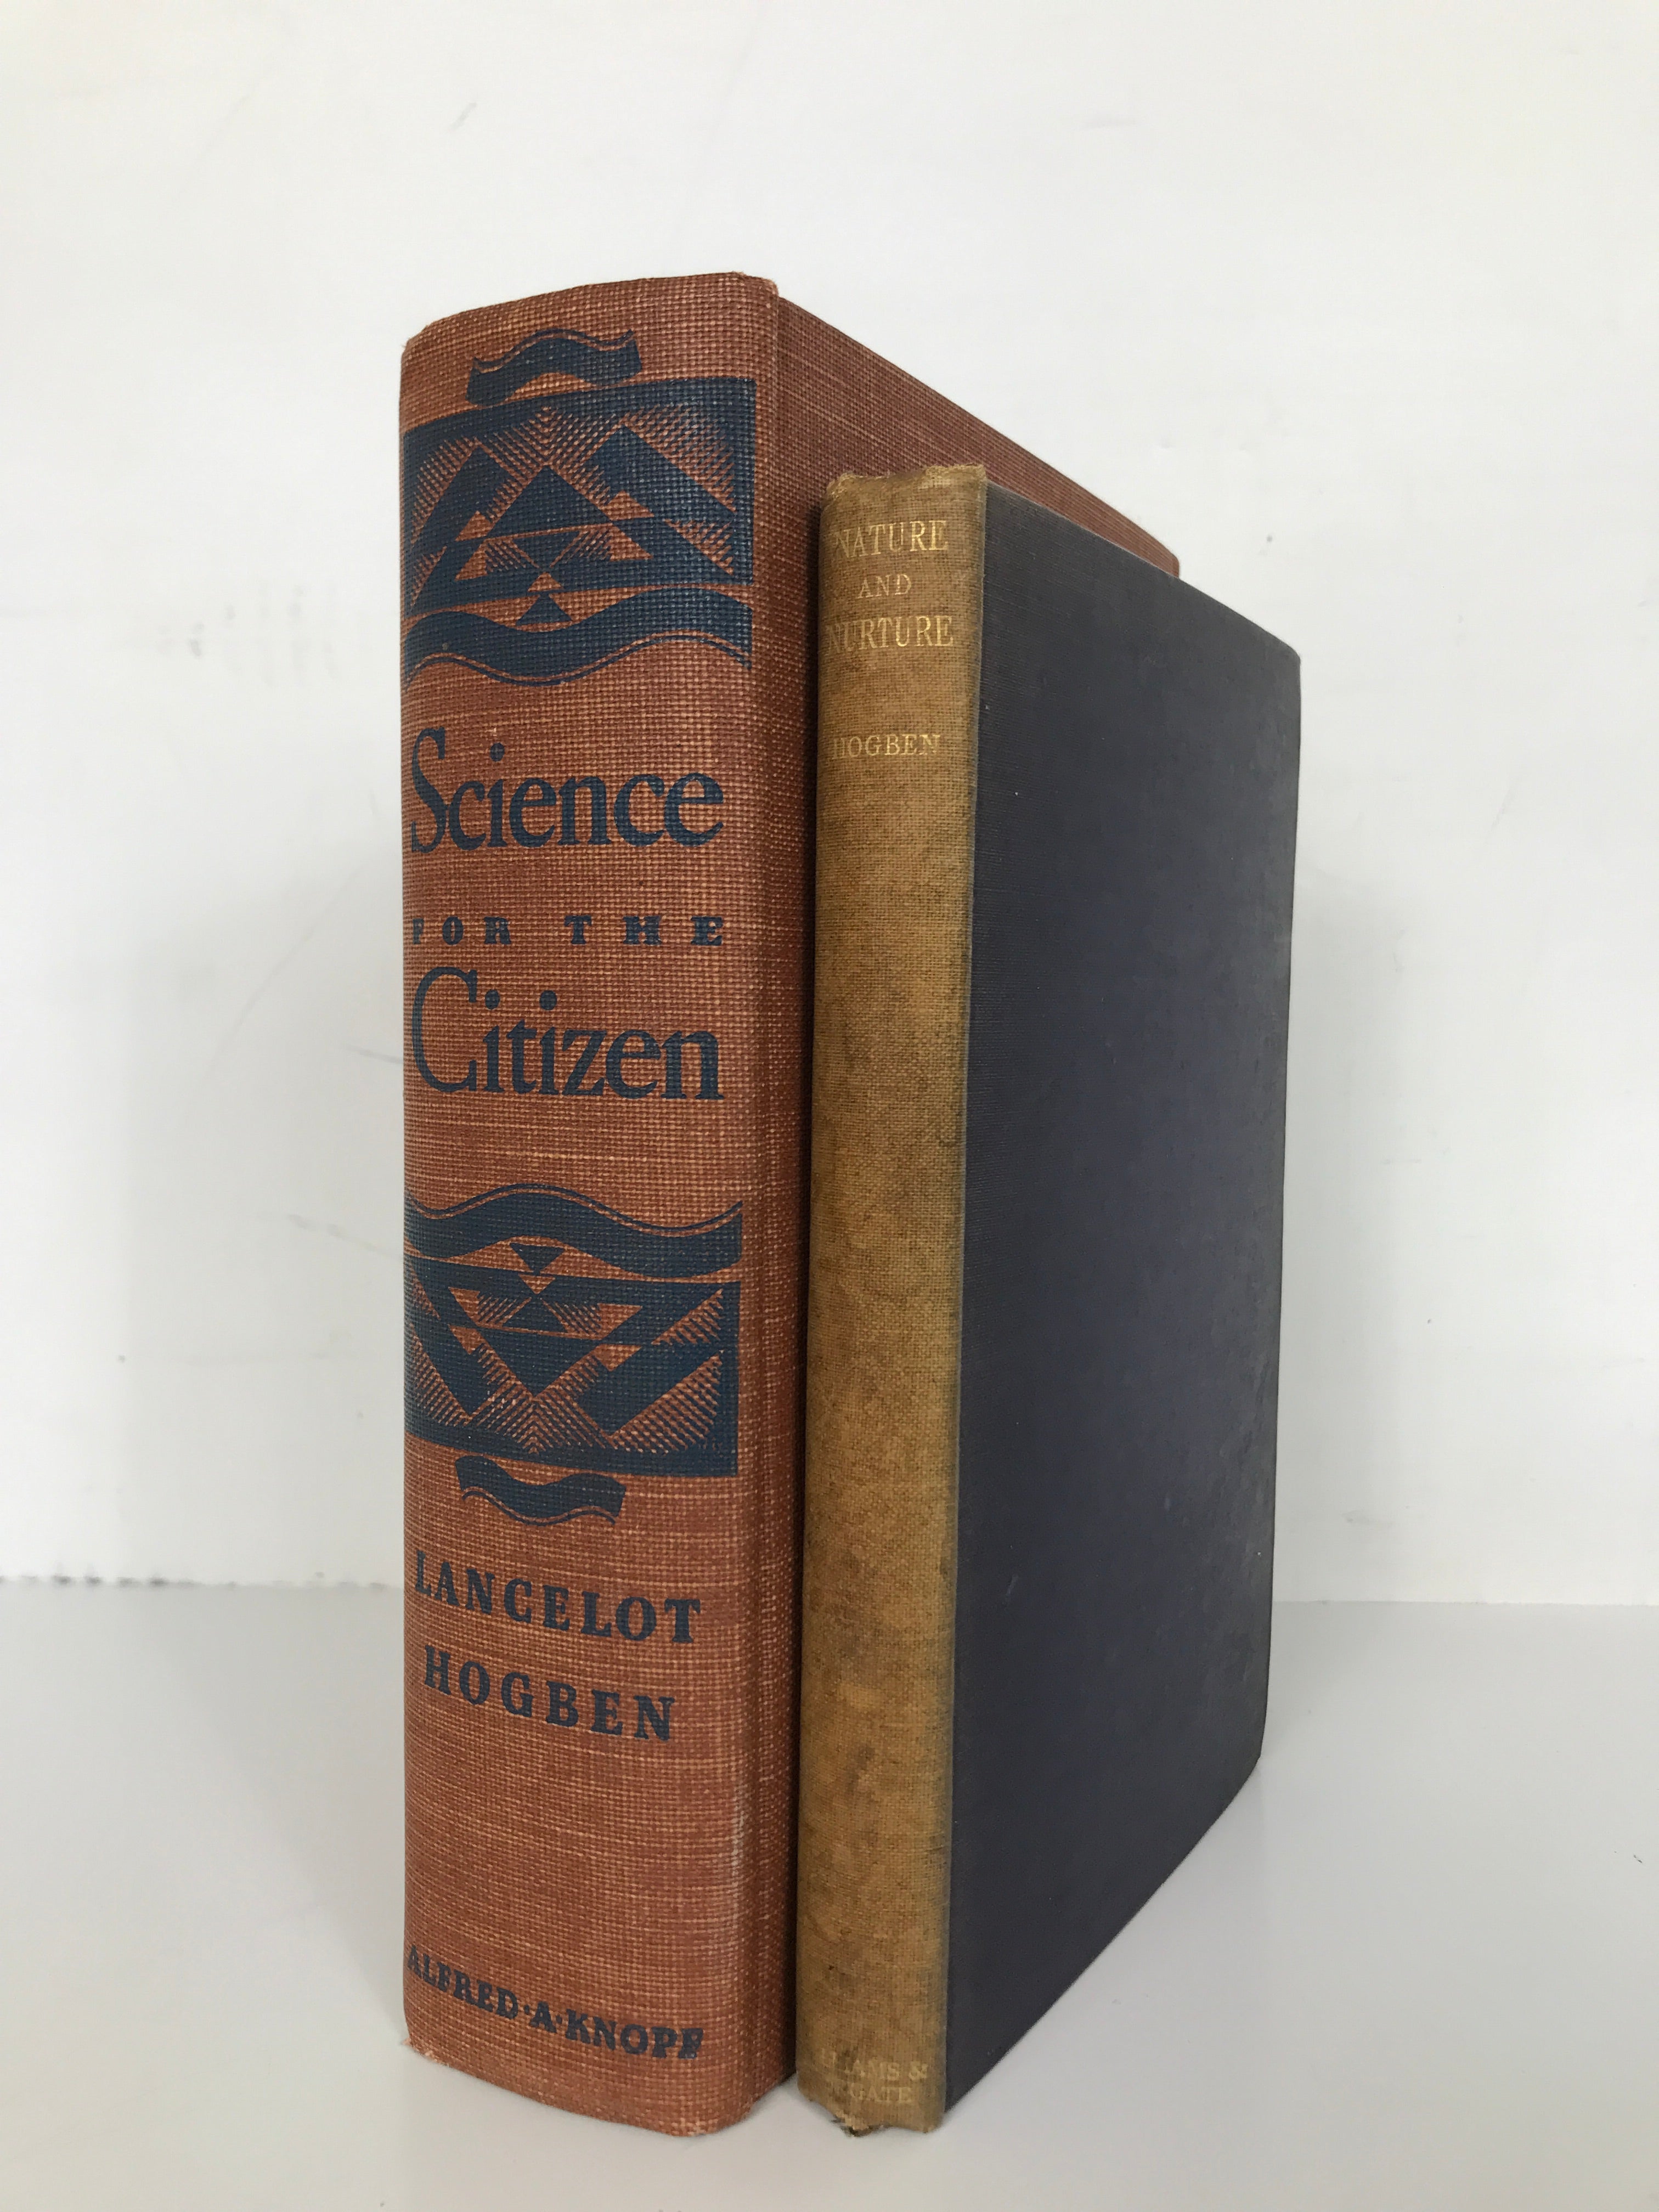 Lot of 2 Hogben Science for the Citizen 1938 and Nature and Nurture 1933 HC